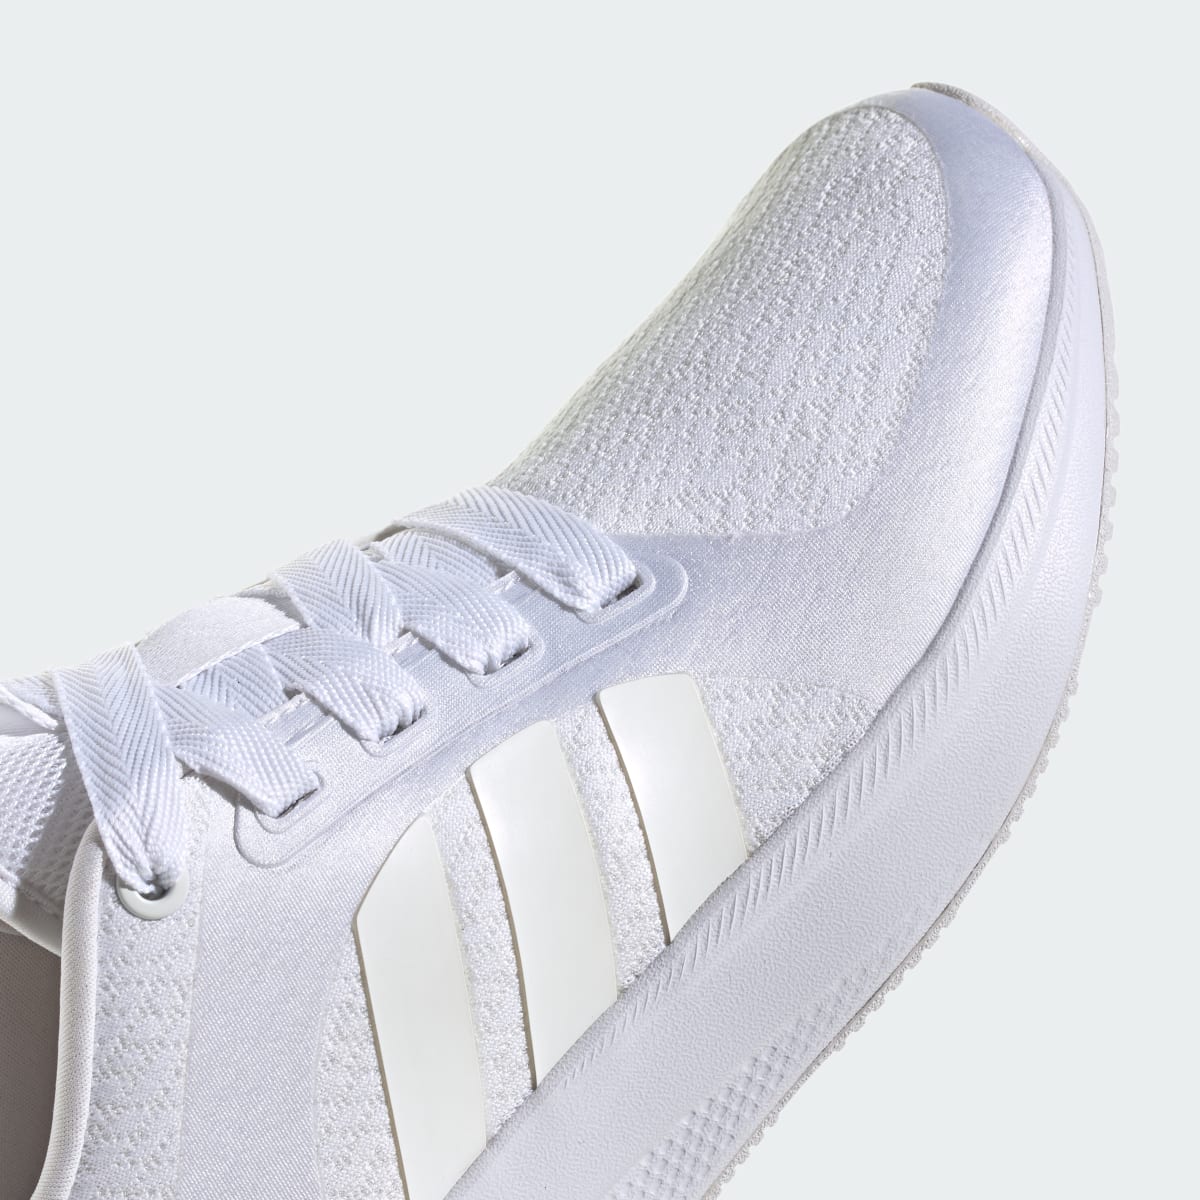 Adidas Edge Lux 6.0 Shoes. 8